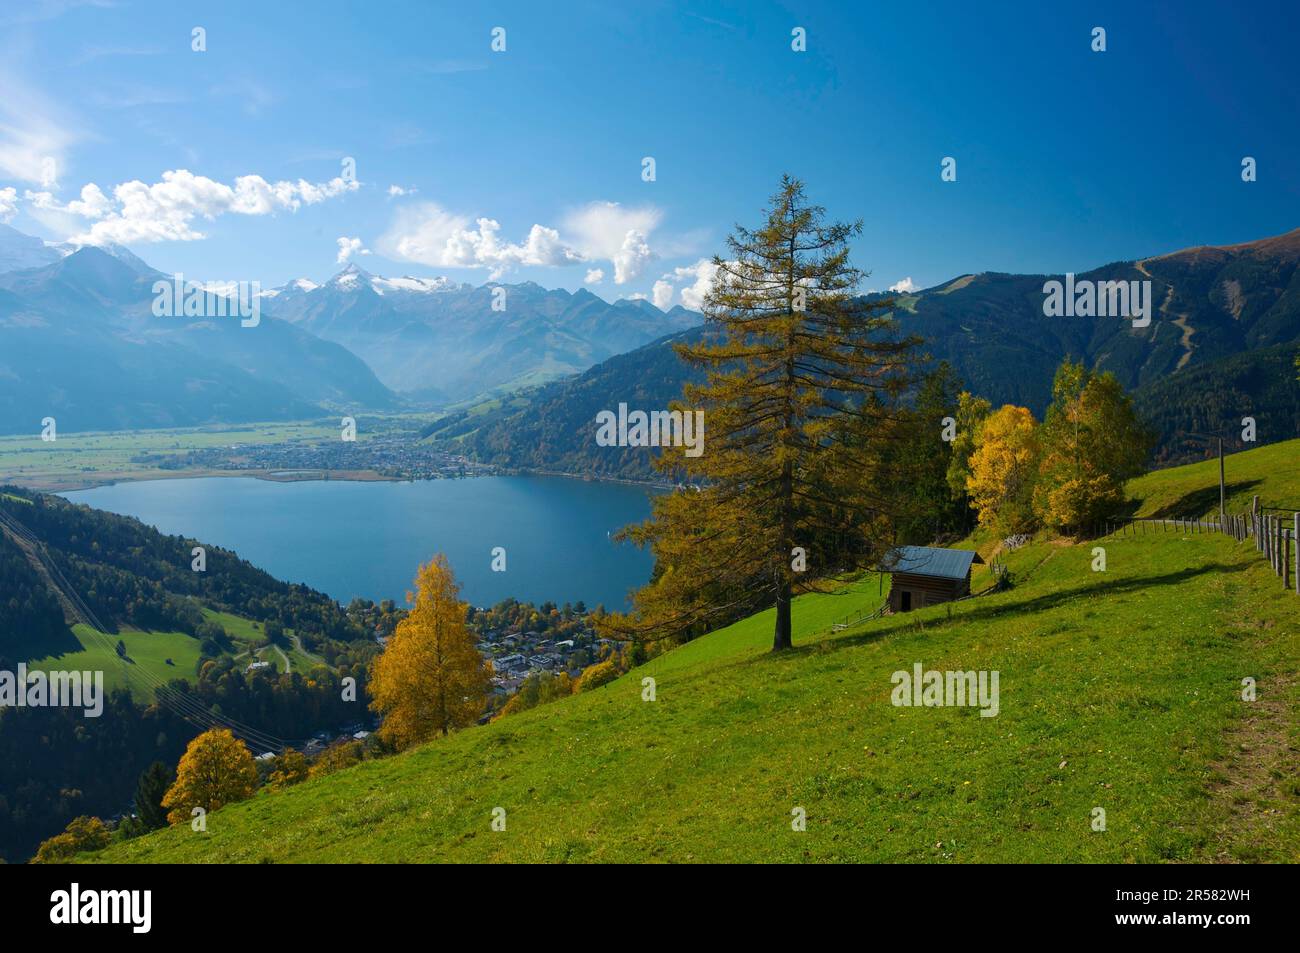 Lake Zell with a view of Thumersbach, Schuettdorf and Hohe Tauern, Pinzgau in Salzburger Land, Austria Stock Photo